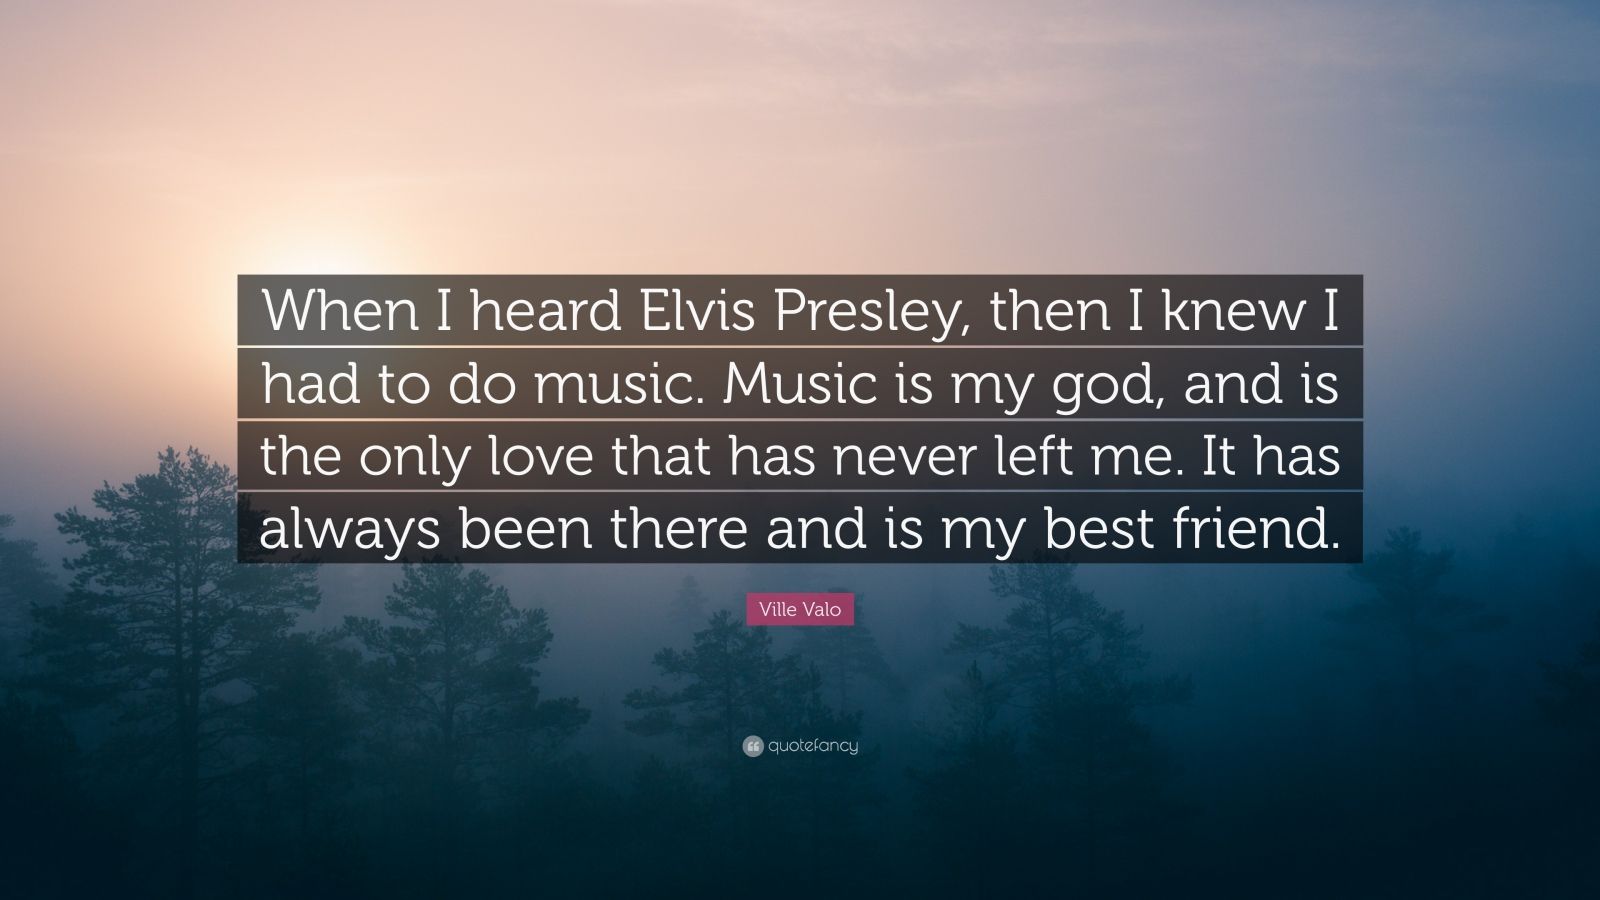 Ville Valo Quote: “When I heard Elvis Presley, then I knew I had to do